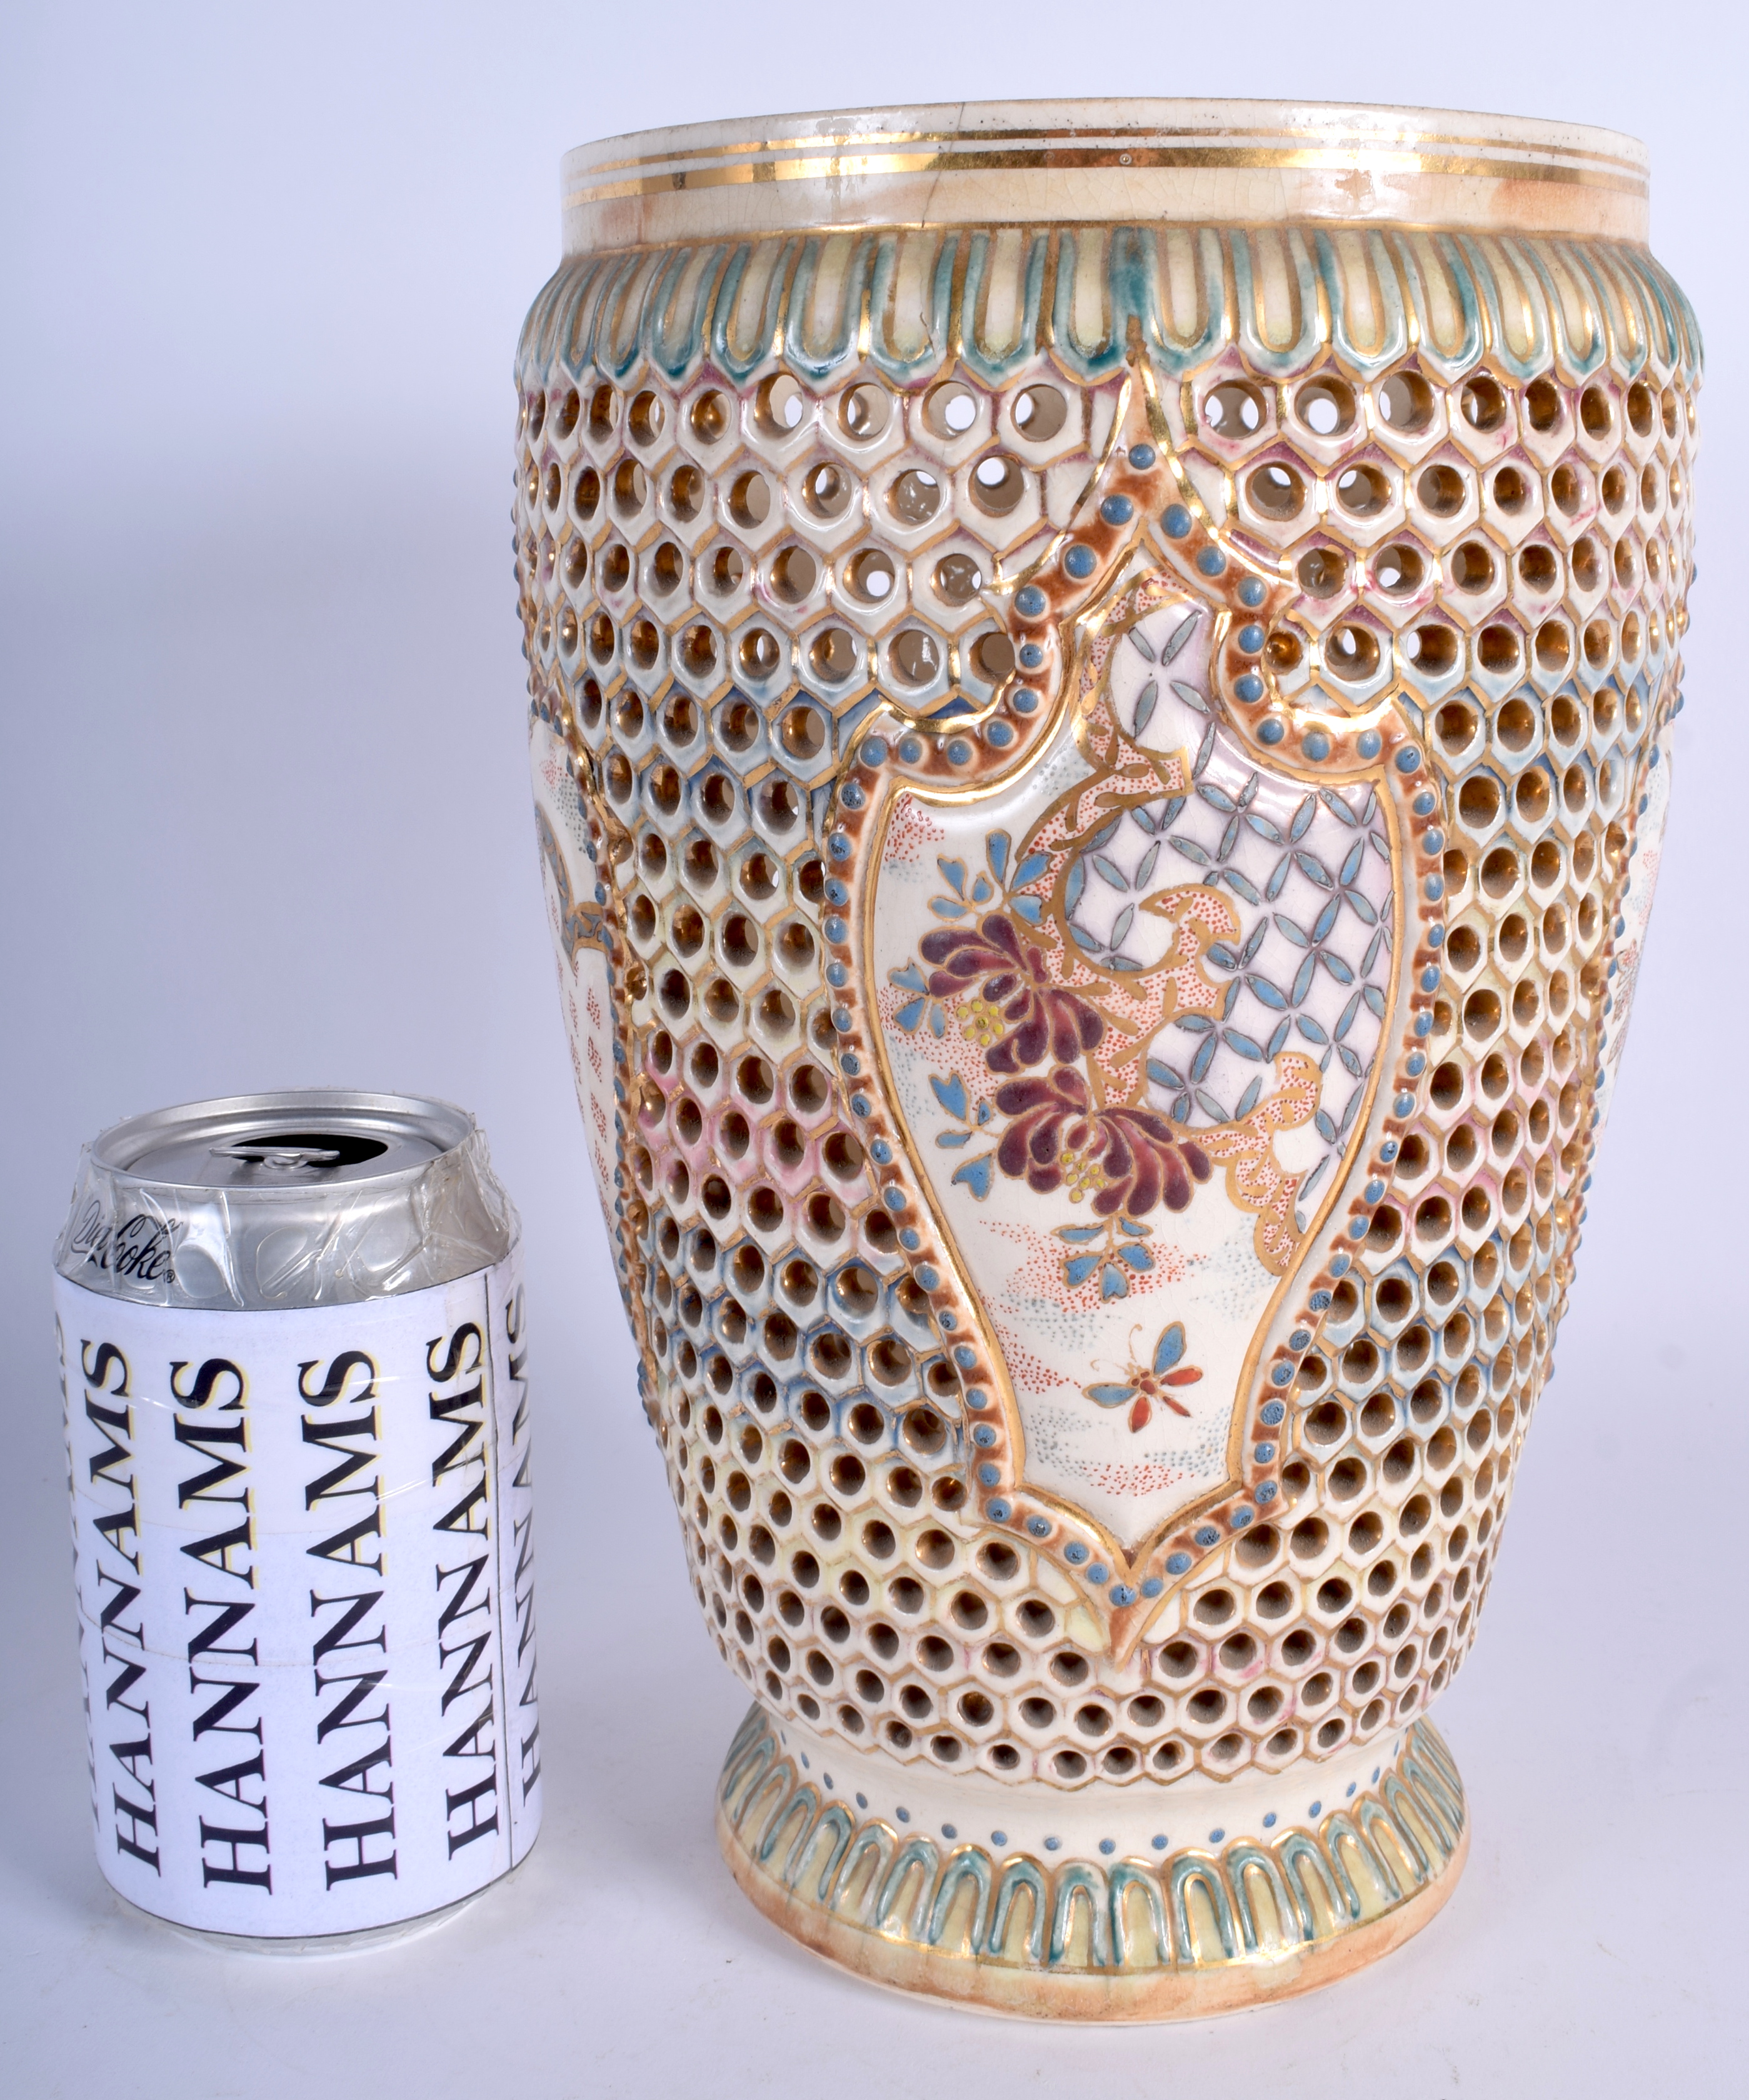 A 19TH CENTURY HUNGARIAN RETICULATED FISCHER BUDAPEST VASE painted with flowers. 26 cm high.